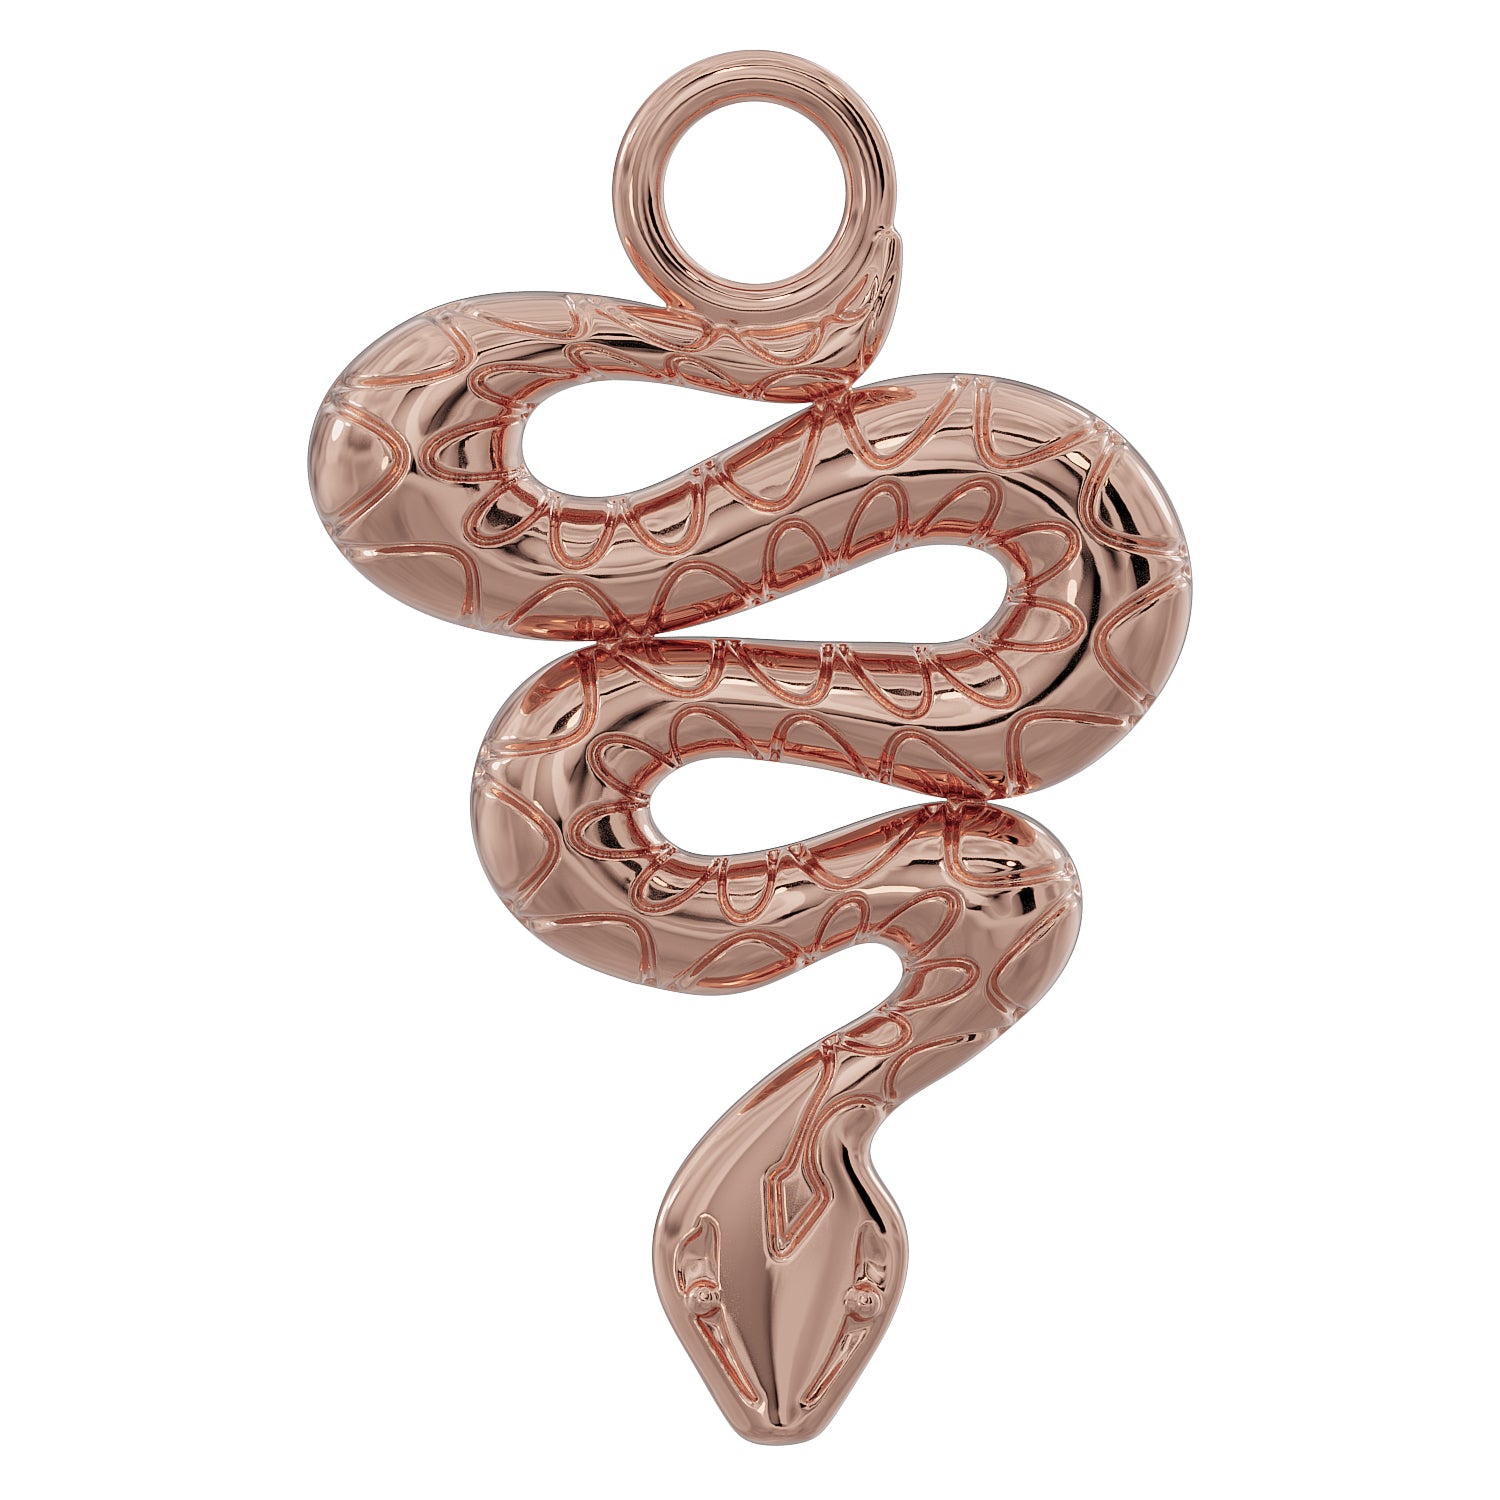 Snake Charm Accessory for Piercing Jewelry-14K Rose Gold